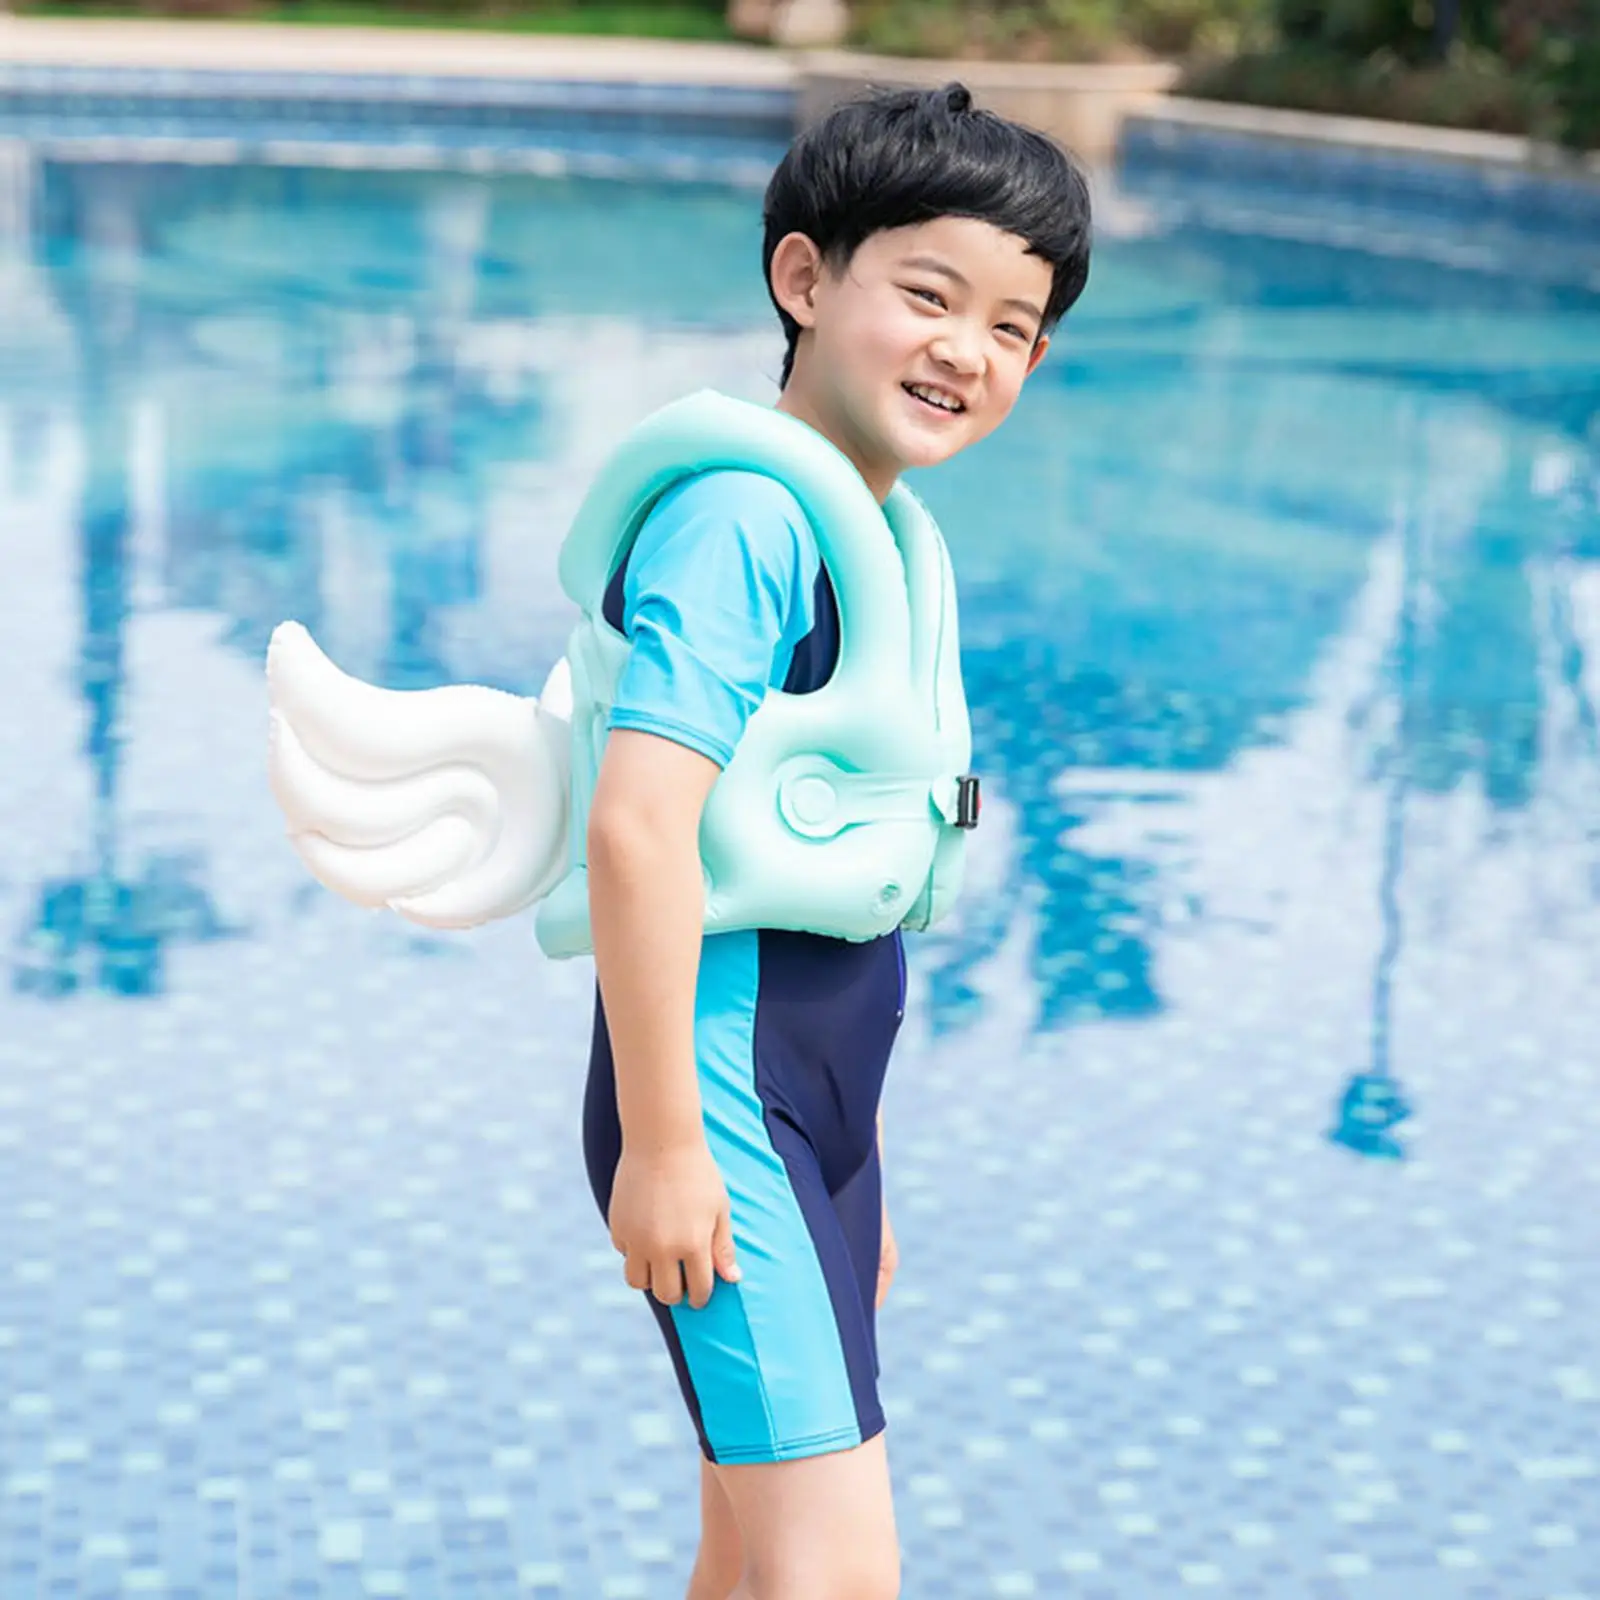 Deluxe Kids Swimming Pool Floats Baby Life Vest Swim Ring Inflatable Buoyancy Aids Beach Pool Photograph Angle Wing Swim Circle 